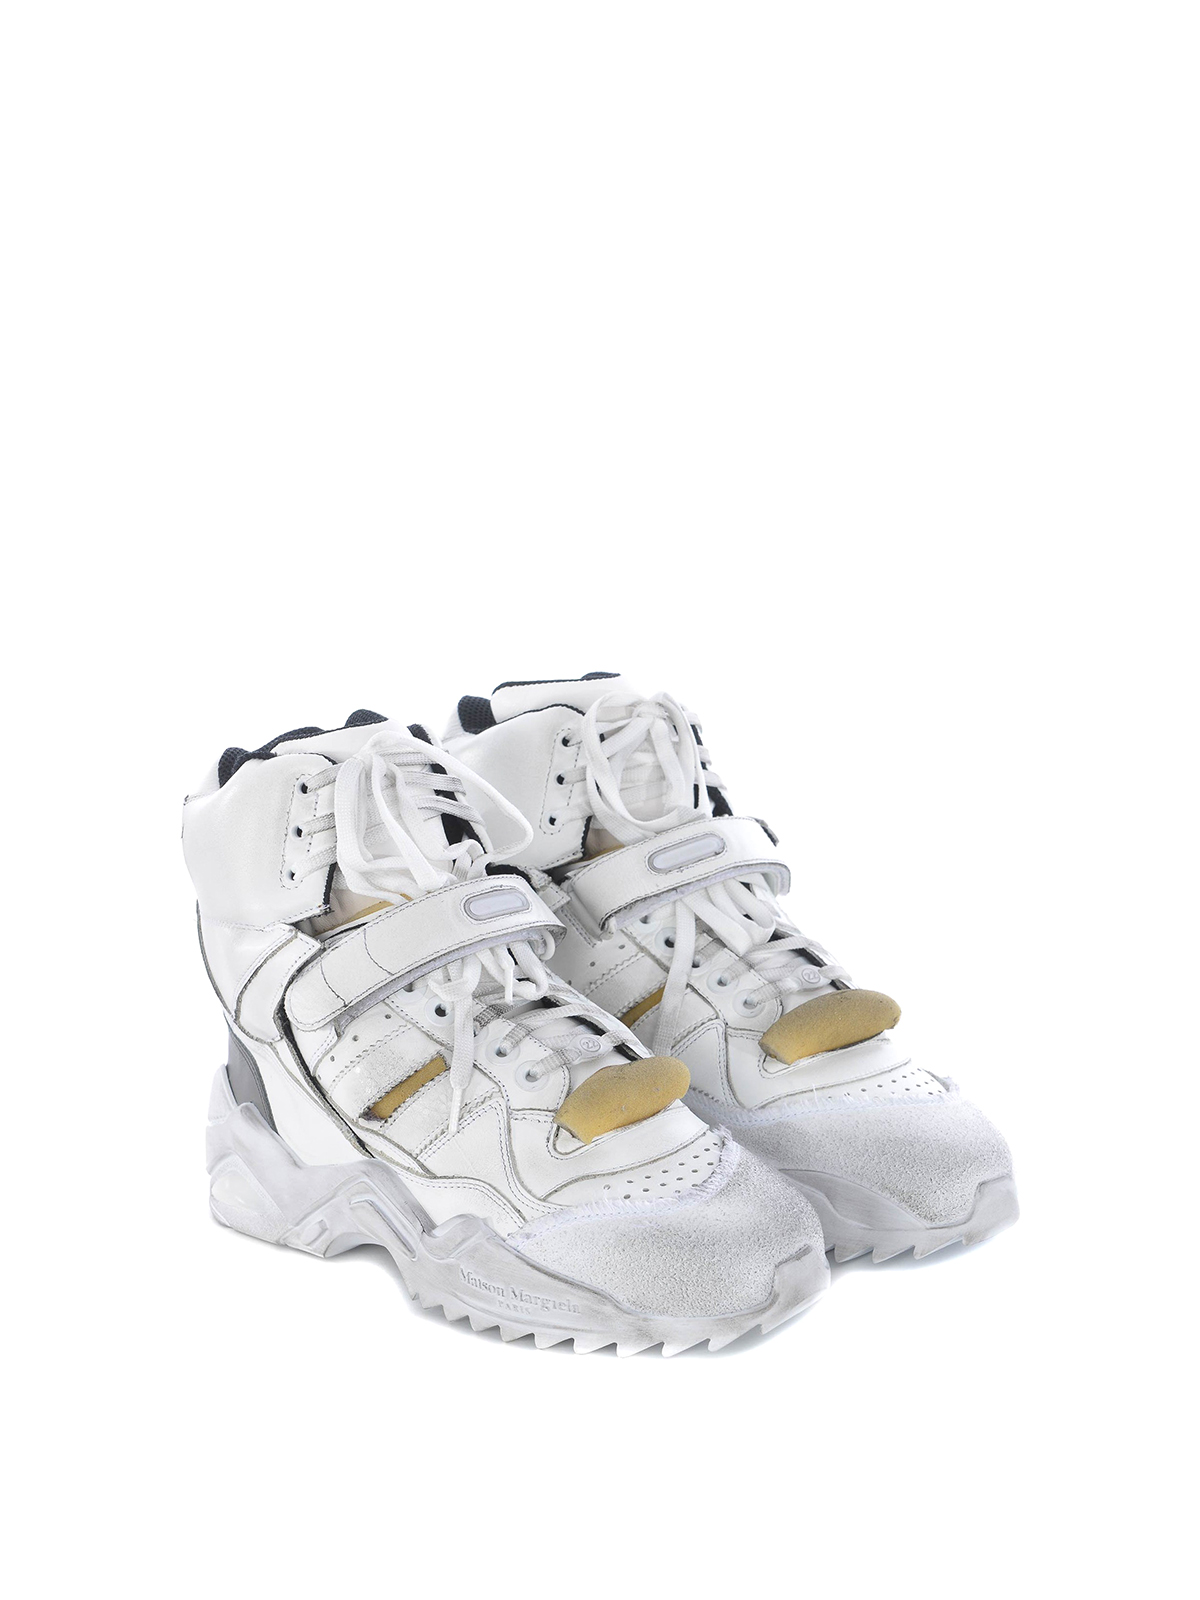 Trainers Maison Margiela - Retro Fit high top sneakers